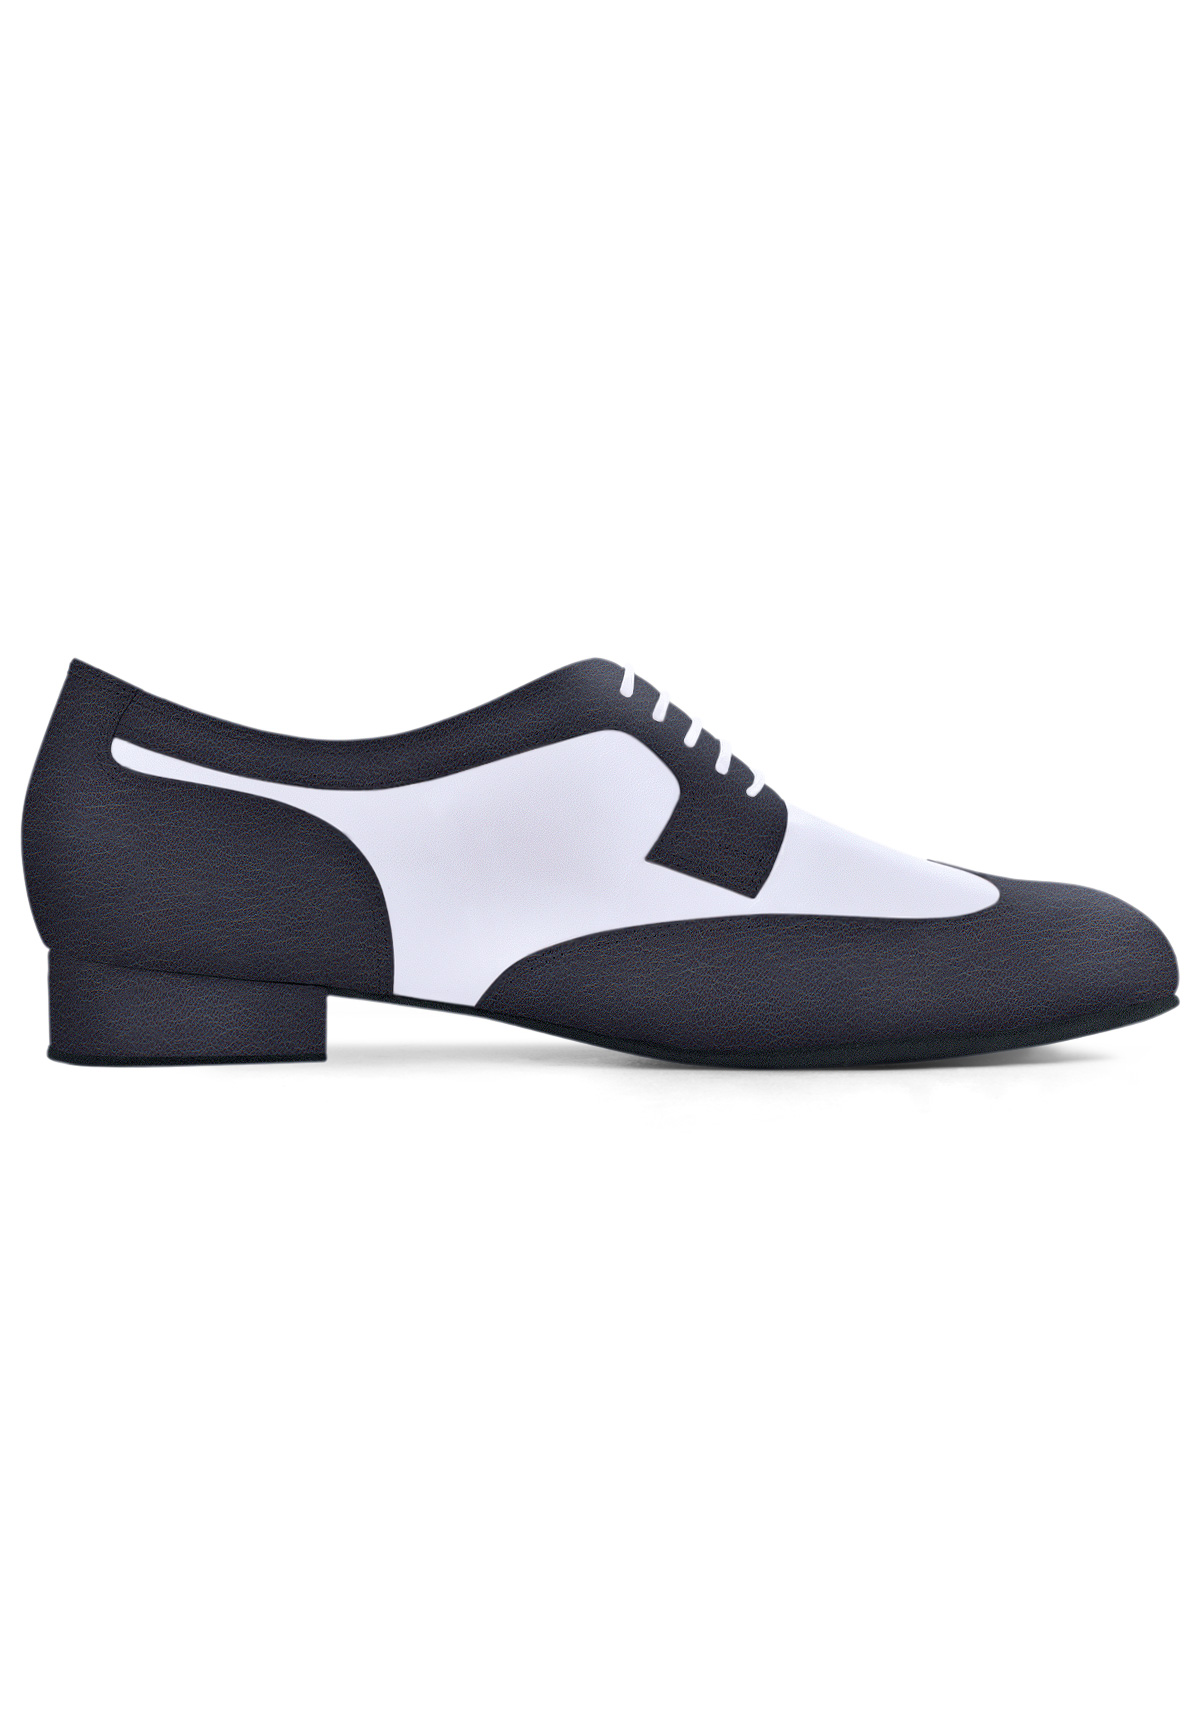 dsi mens casual shoes